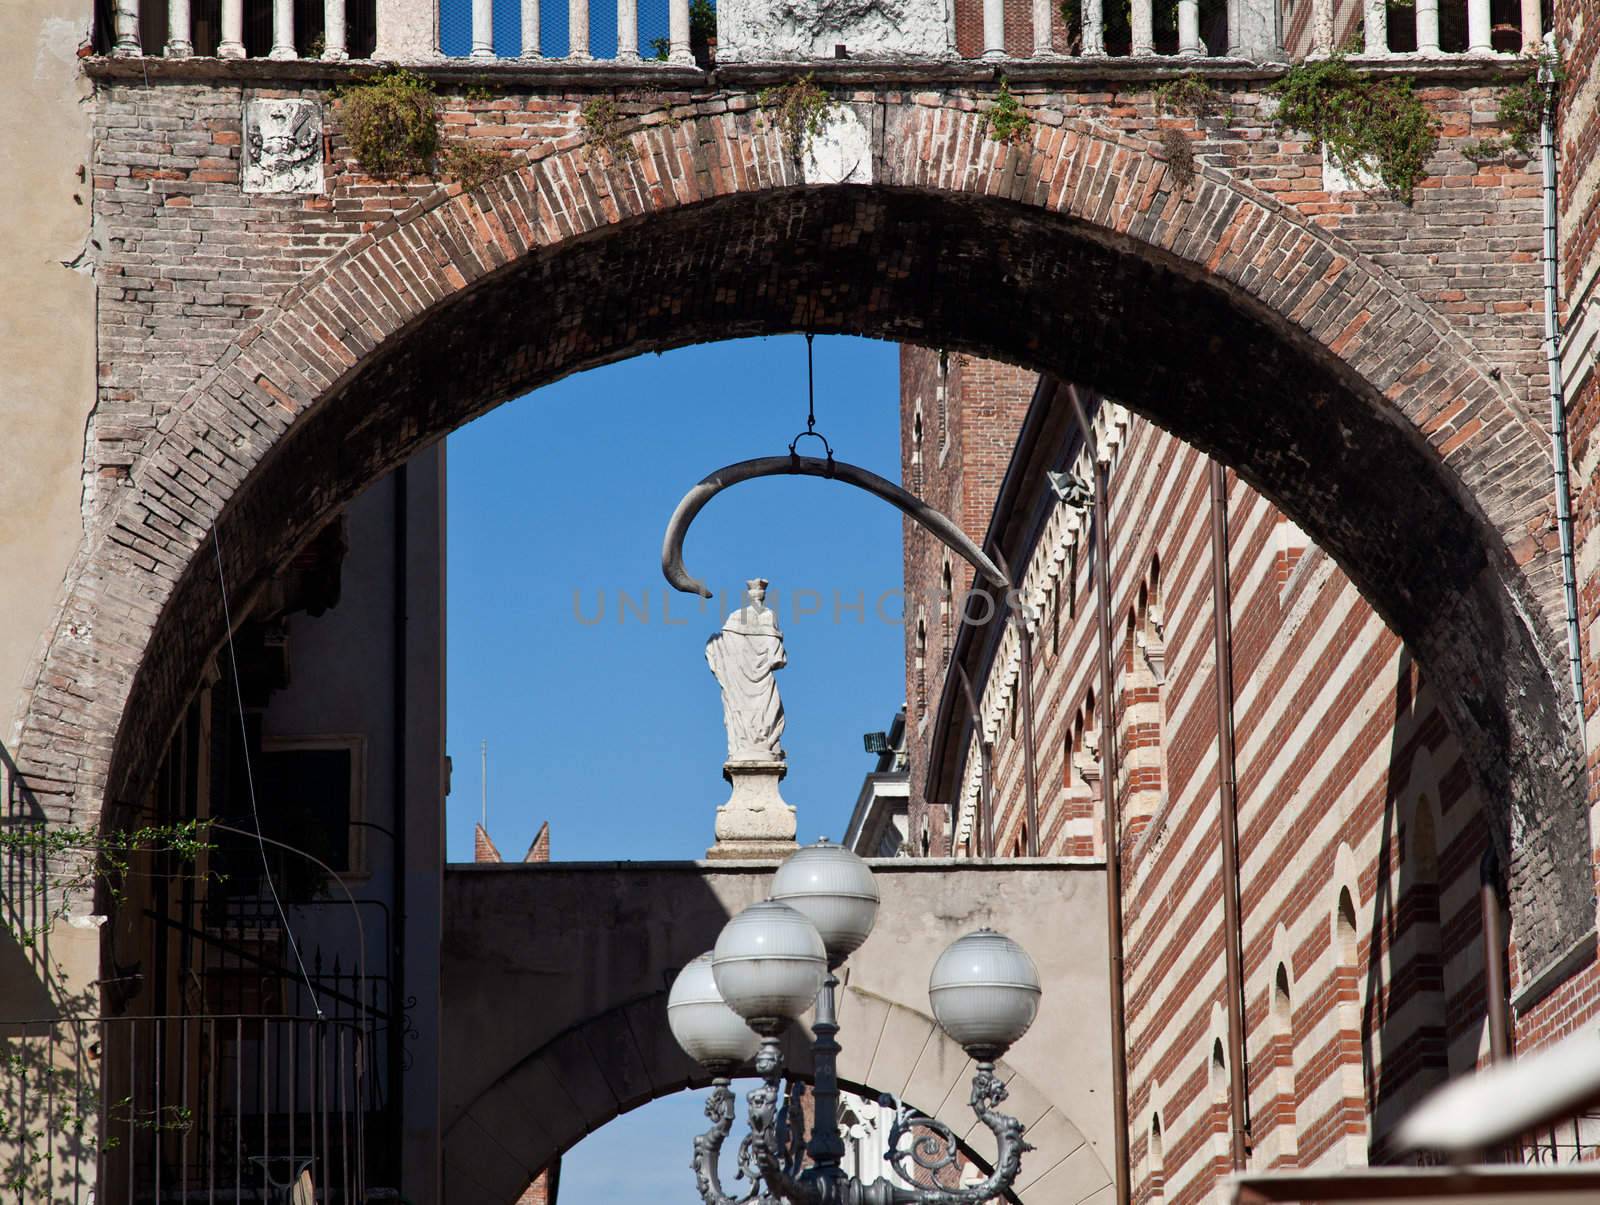 Arches between Erbe and Signori in Verona with hanging whale bone